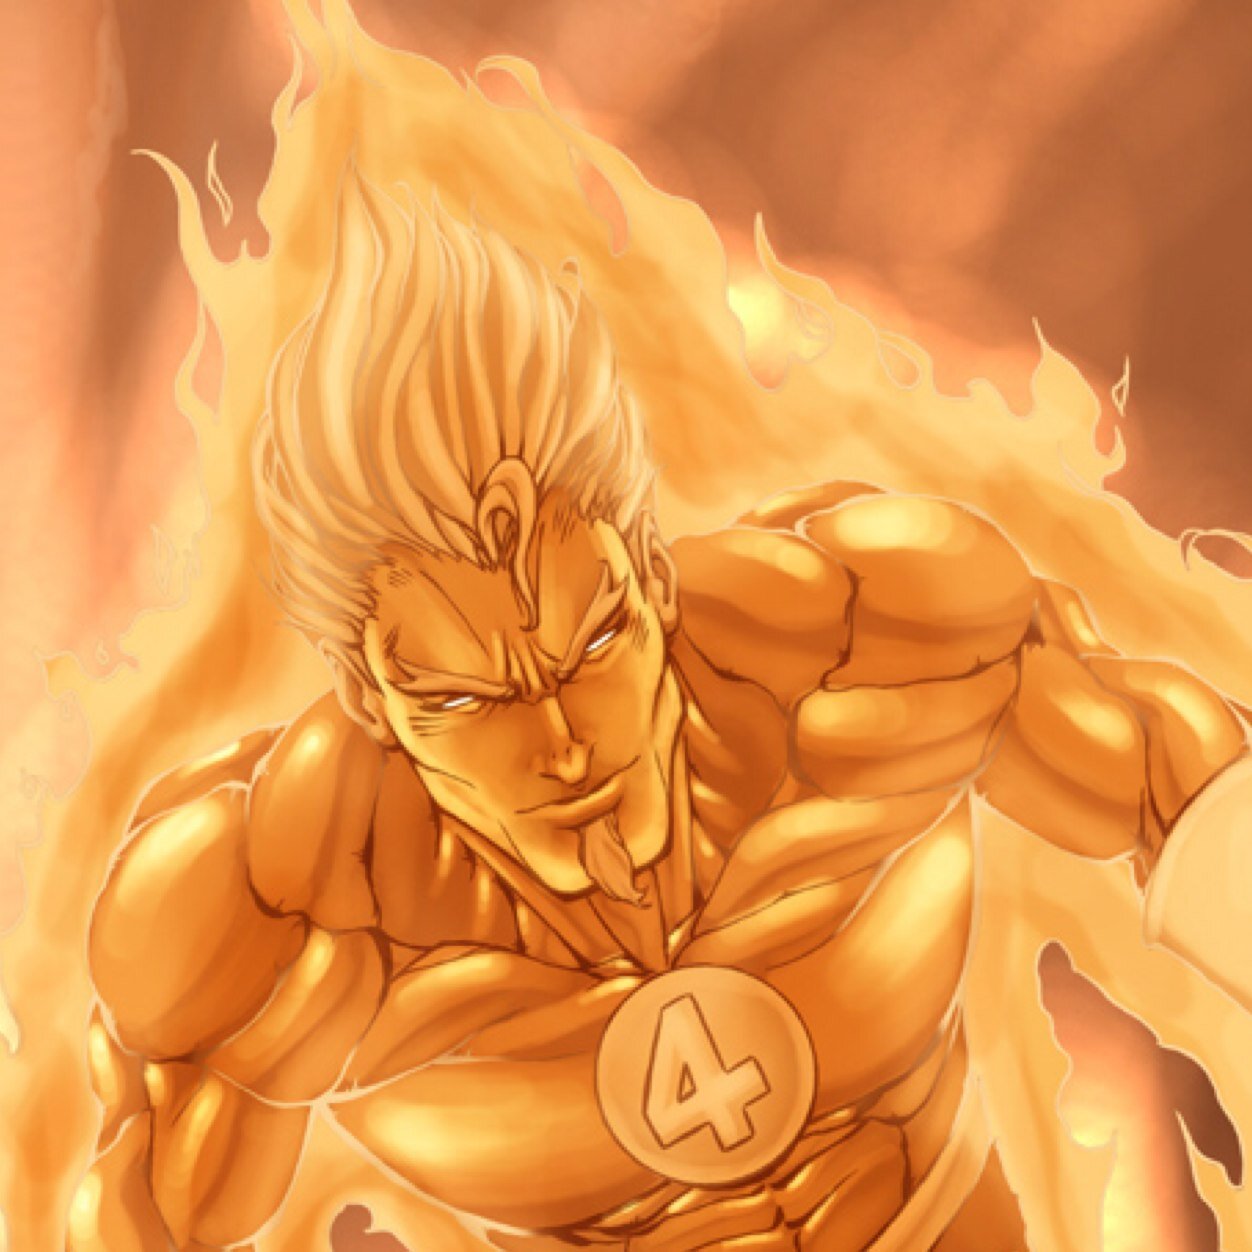 Huh? You talking to me? Shouldn't you know who I am? I'm Johnny Storm! Hot-Head and only lively person of the Fantastic Four! Flame on! #MarvelRP [616]